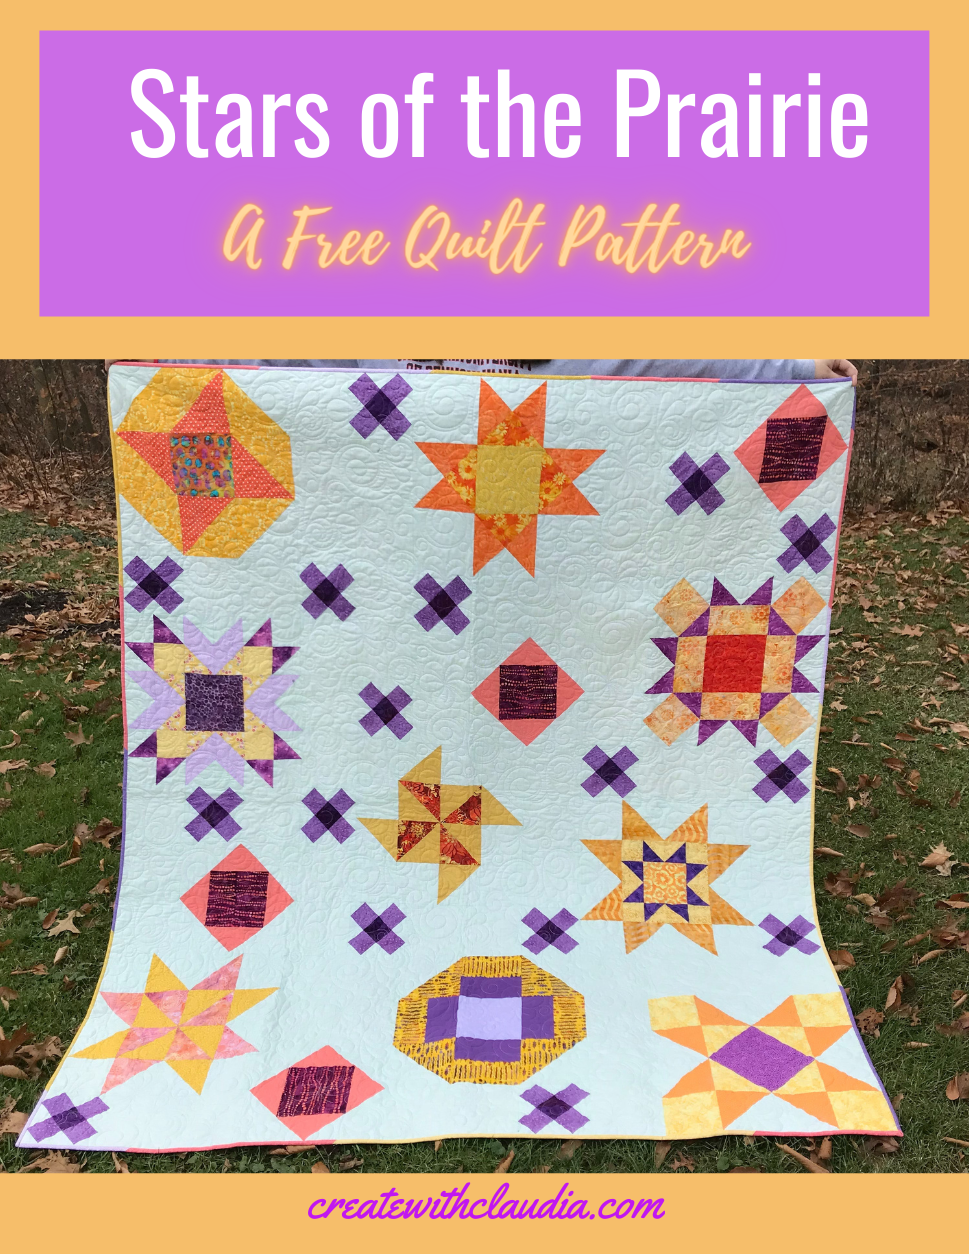 "Stars of the Prairie" is a Free Mystery Quilt Pattern designed by Claudia from Create with Claudia!